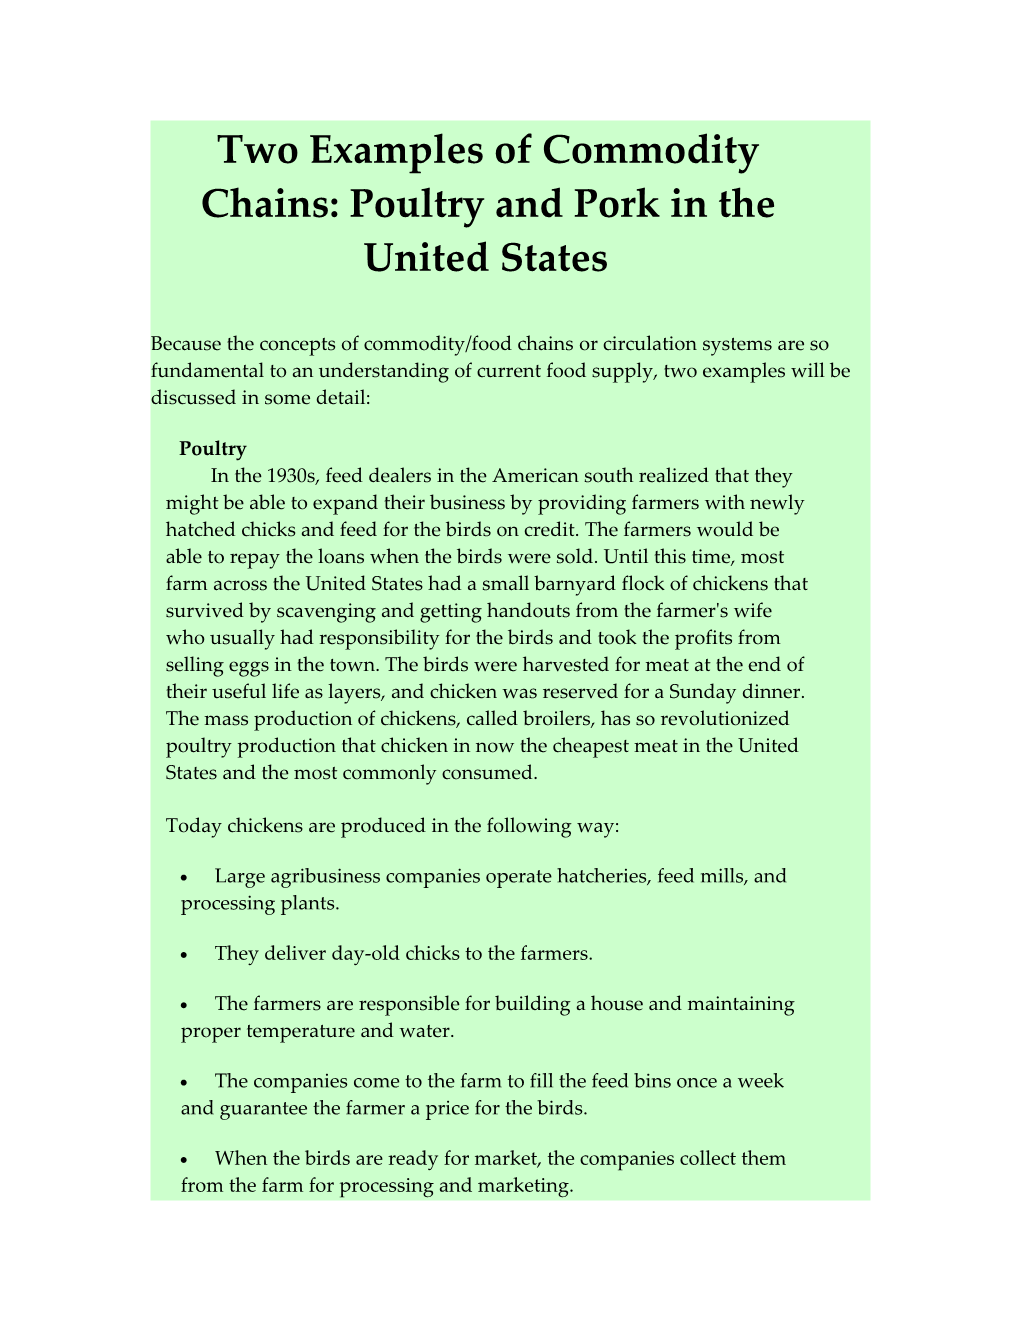 Two Examples of Commodity Chains: Poultry and Pork in the United States